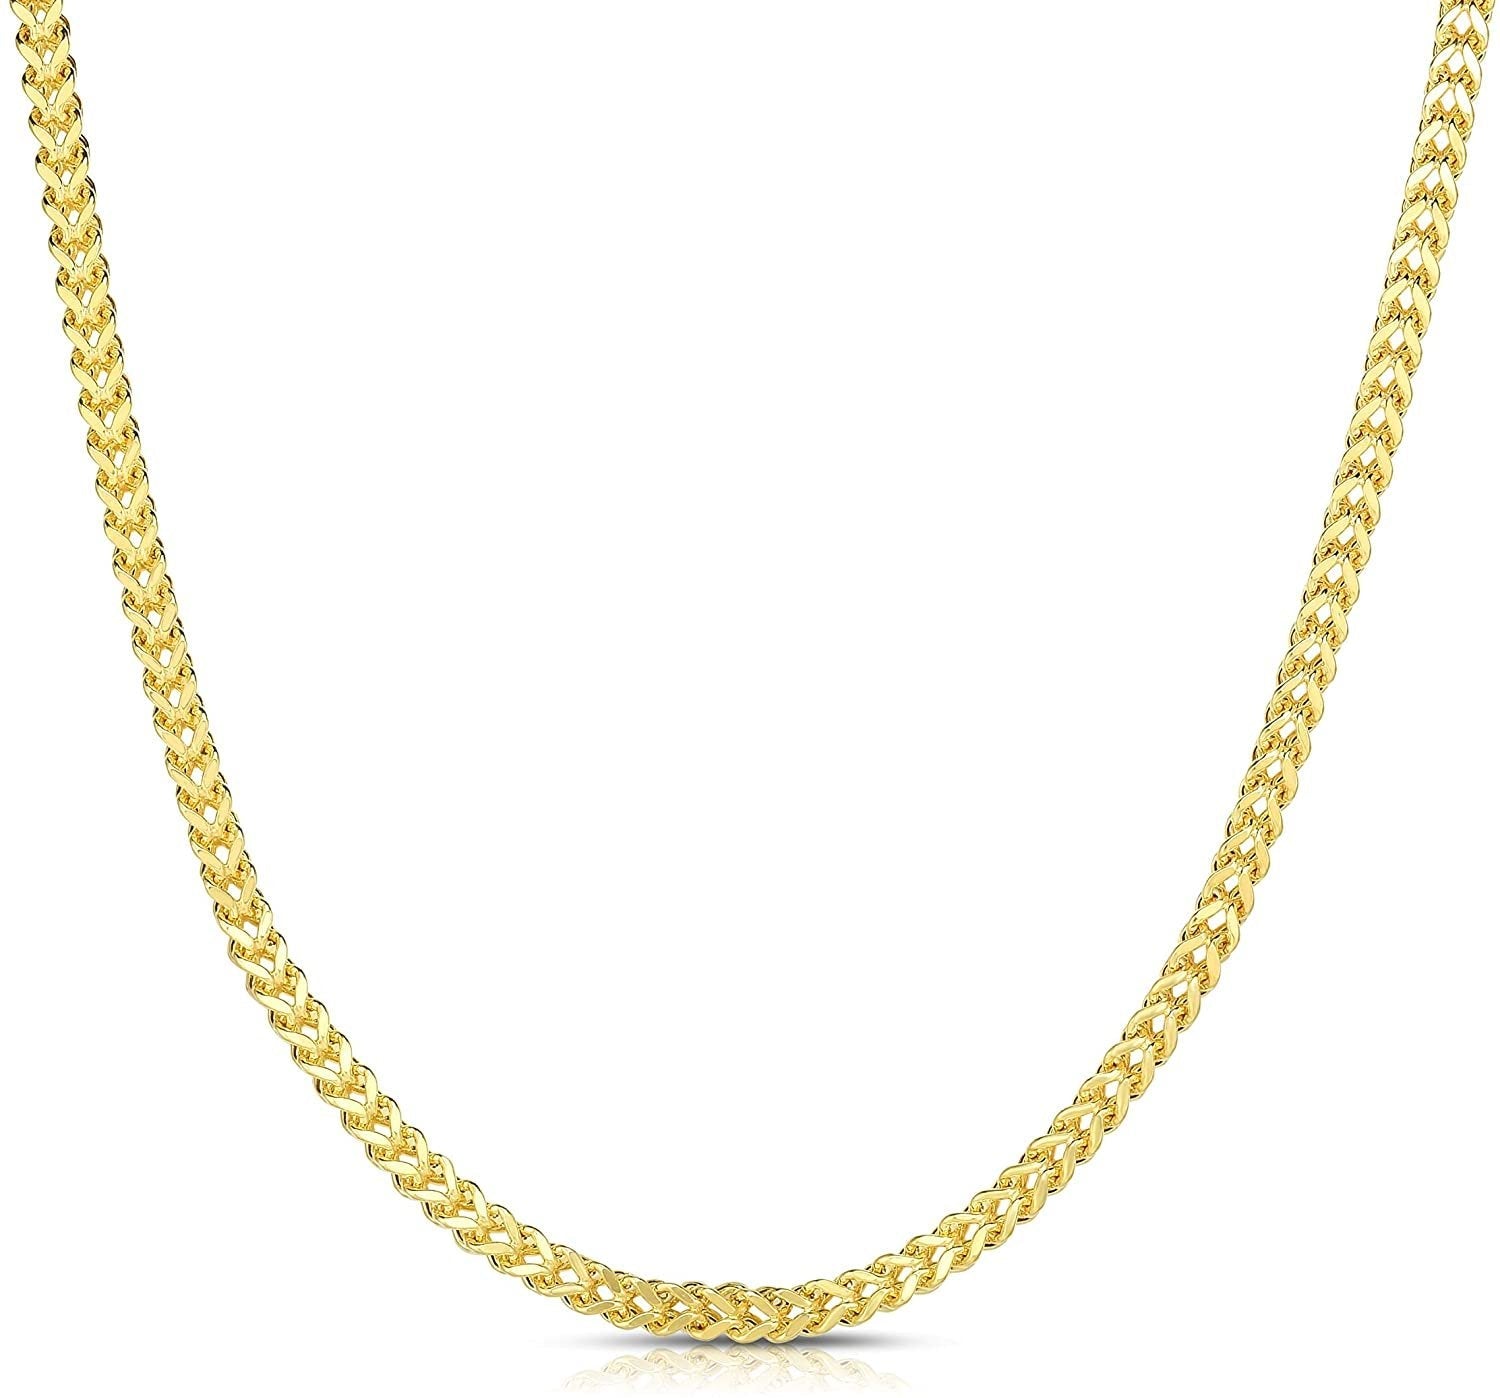 Floreo 14k Yellow Gold Lightweight Franco Chain Necklace or Bracelet